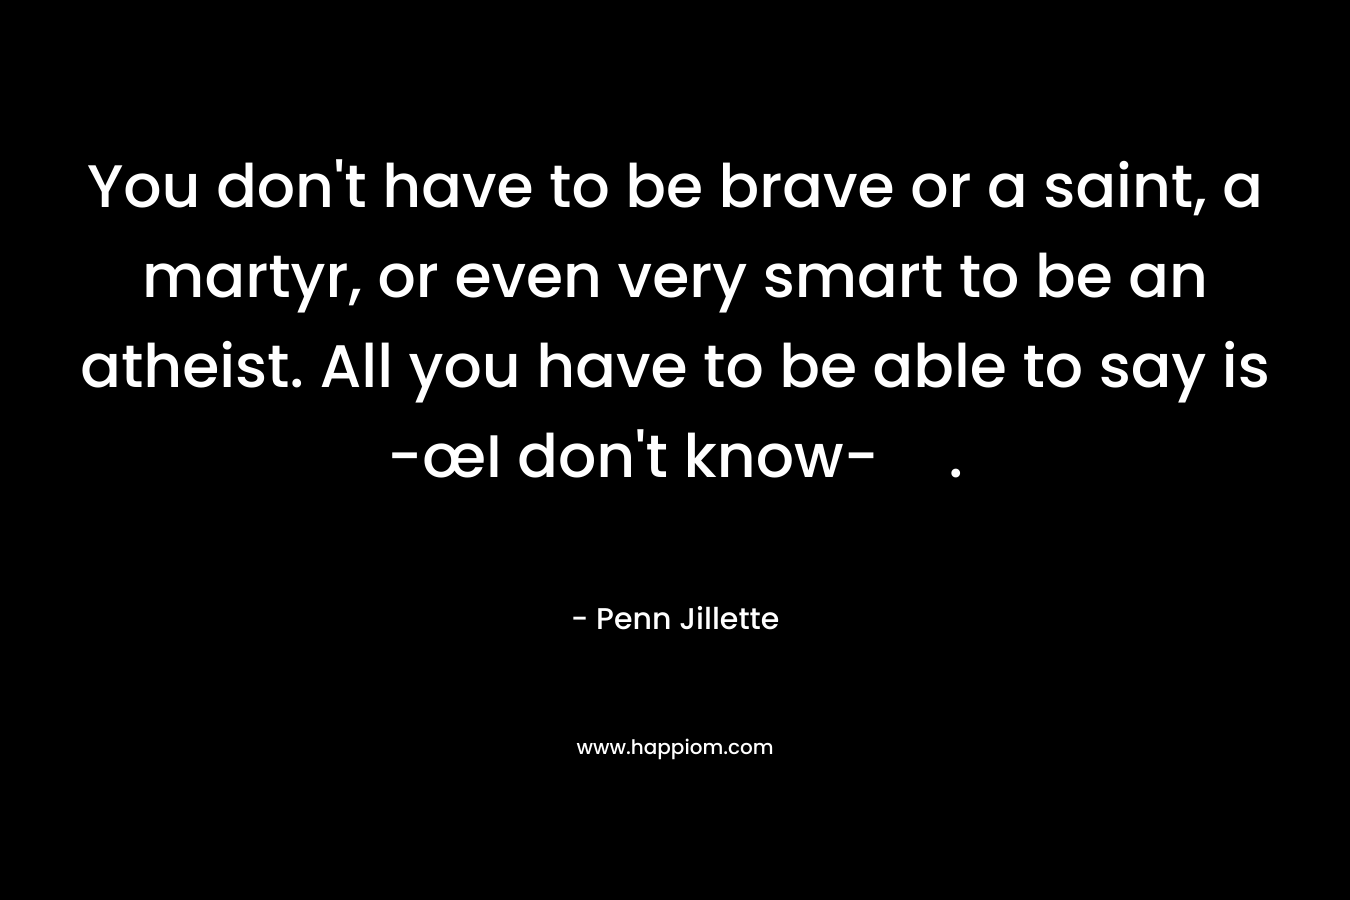 You don’t have to be brave or a saint, a martyr, or even very smart to be an atheist. All you have to be able to say is -œI don’t know-. – Penn Jillette